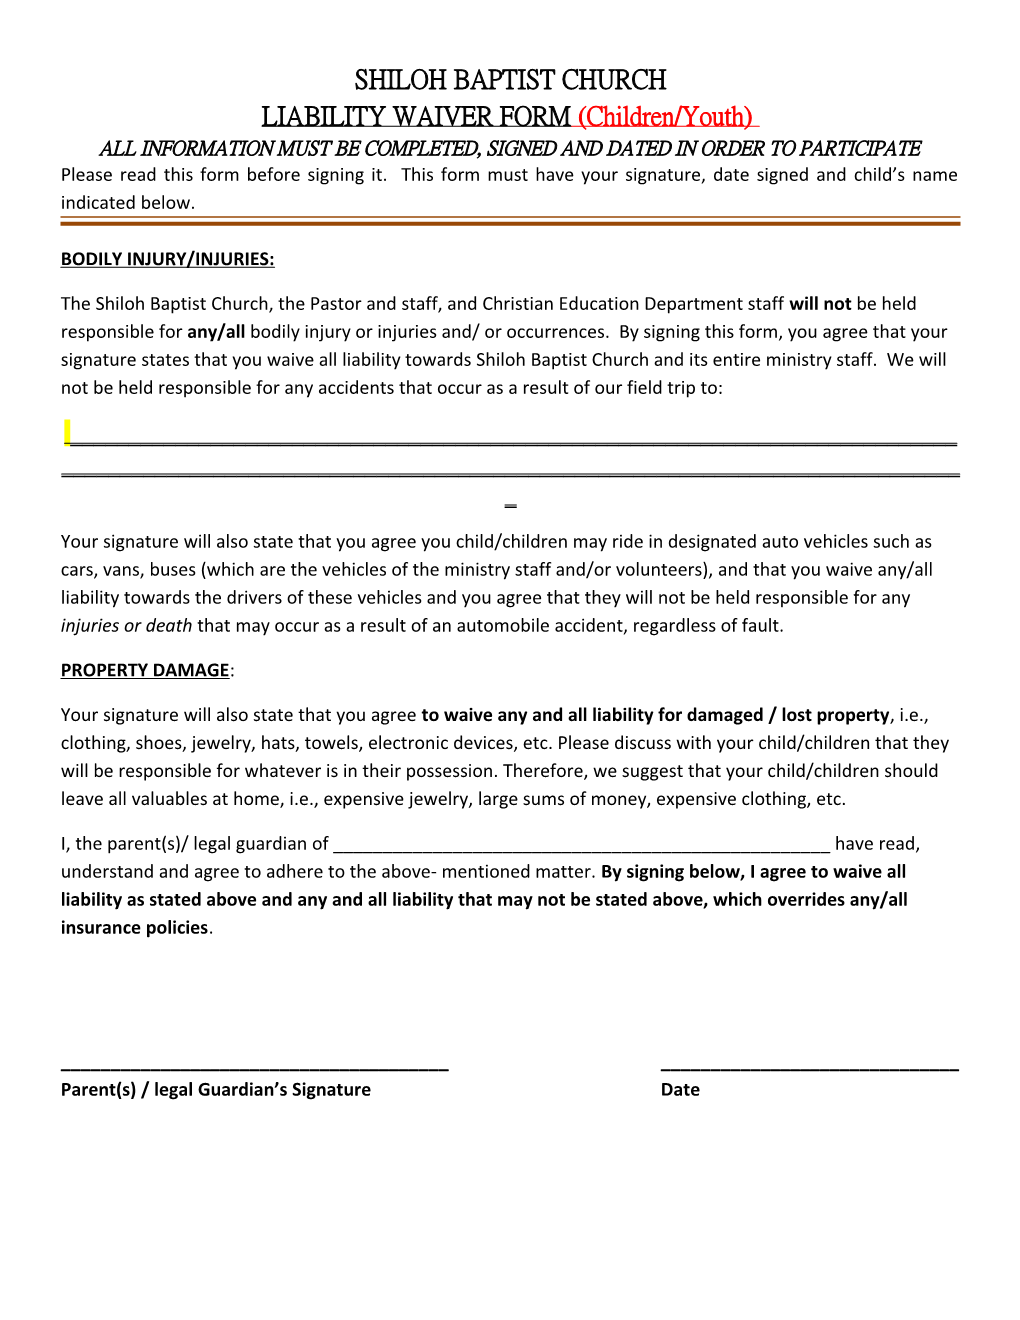 LIABILITY WAIVER FORM (Children/Youth)